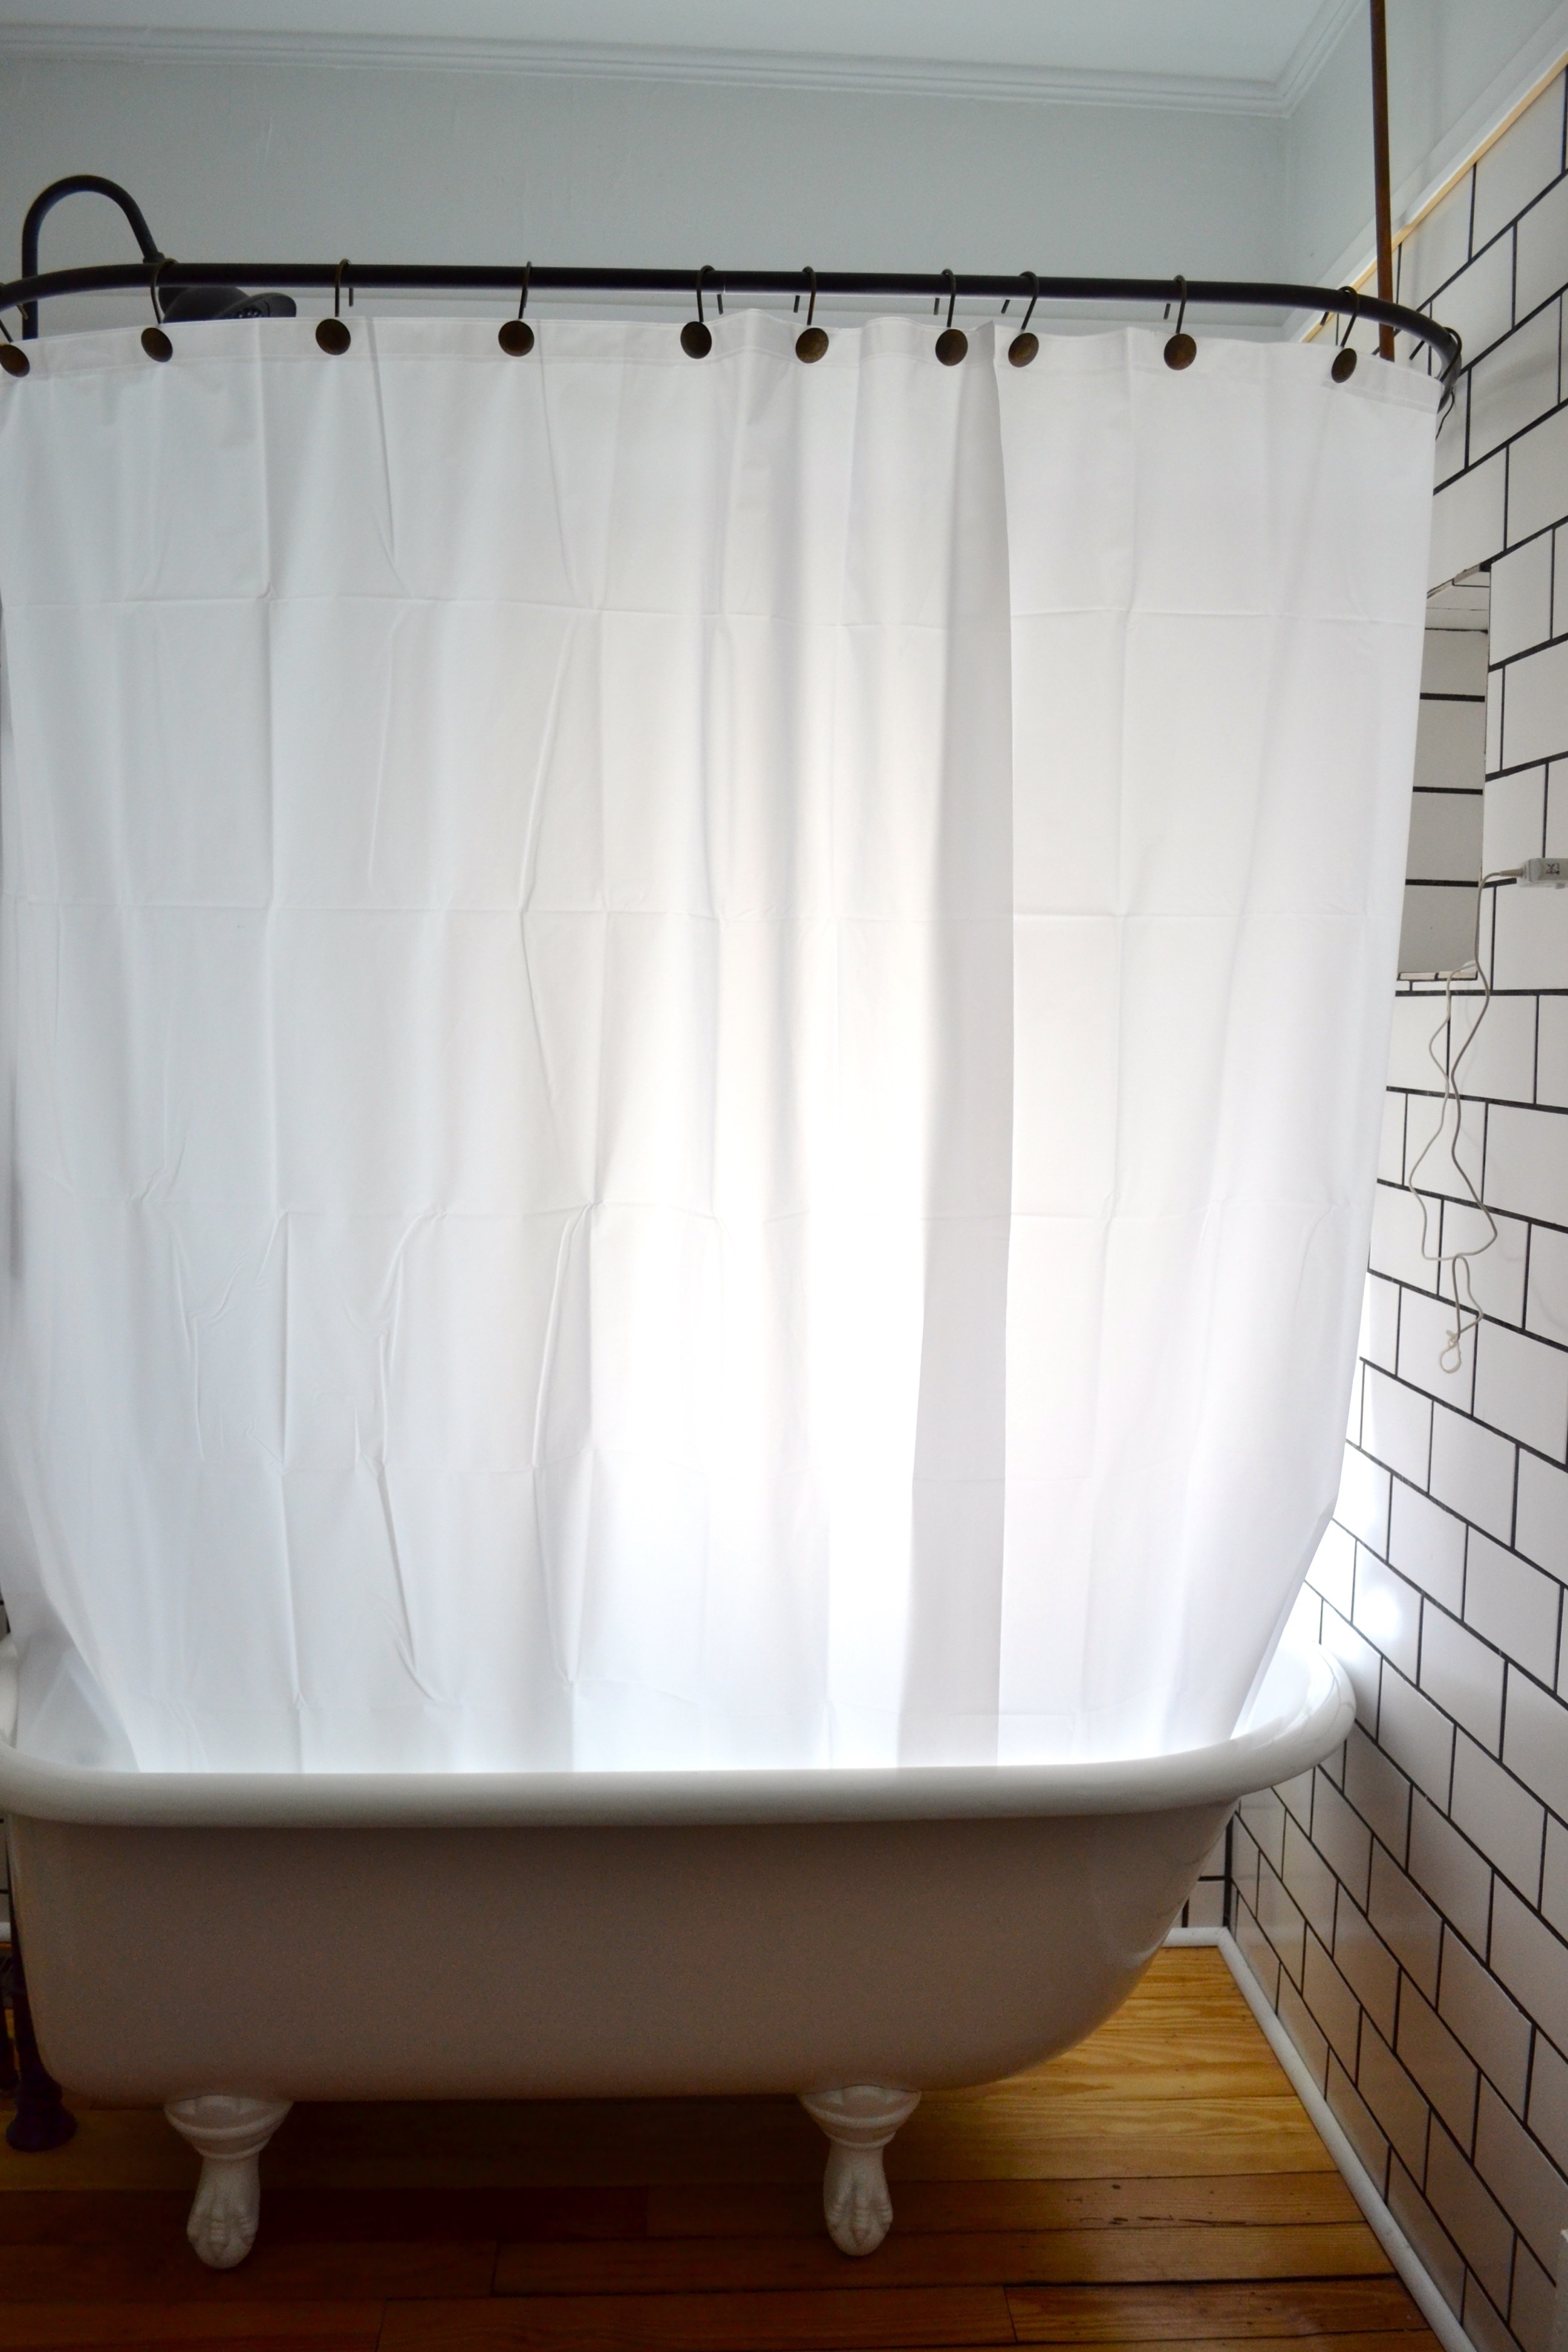 Clawfoot Tub Shower Curtain Liner, Clawfoot Tub Shower Curtain Rod You Can Make Yourself